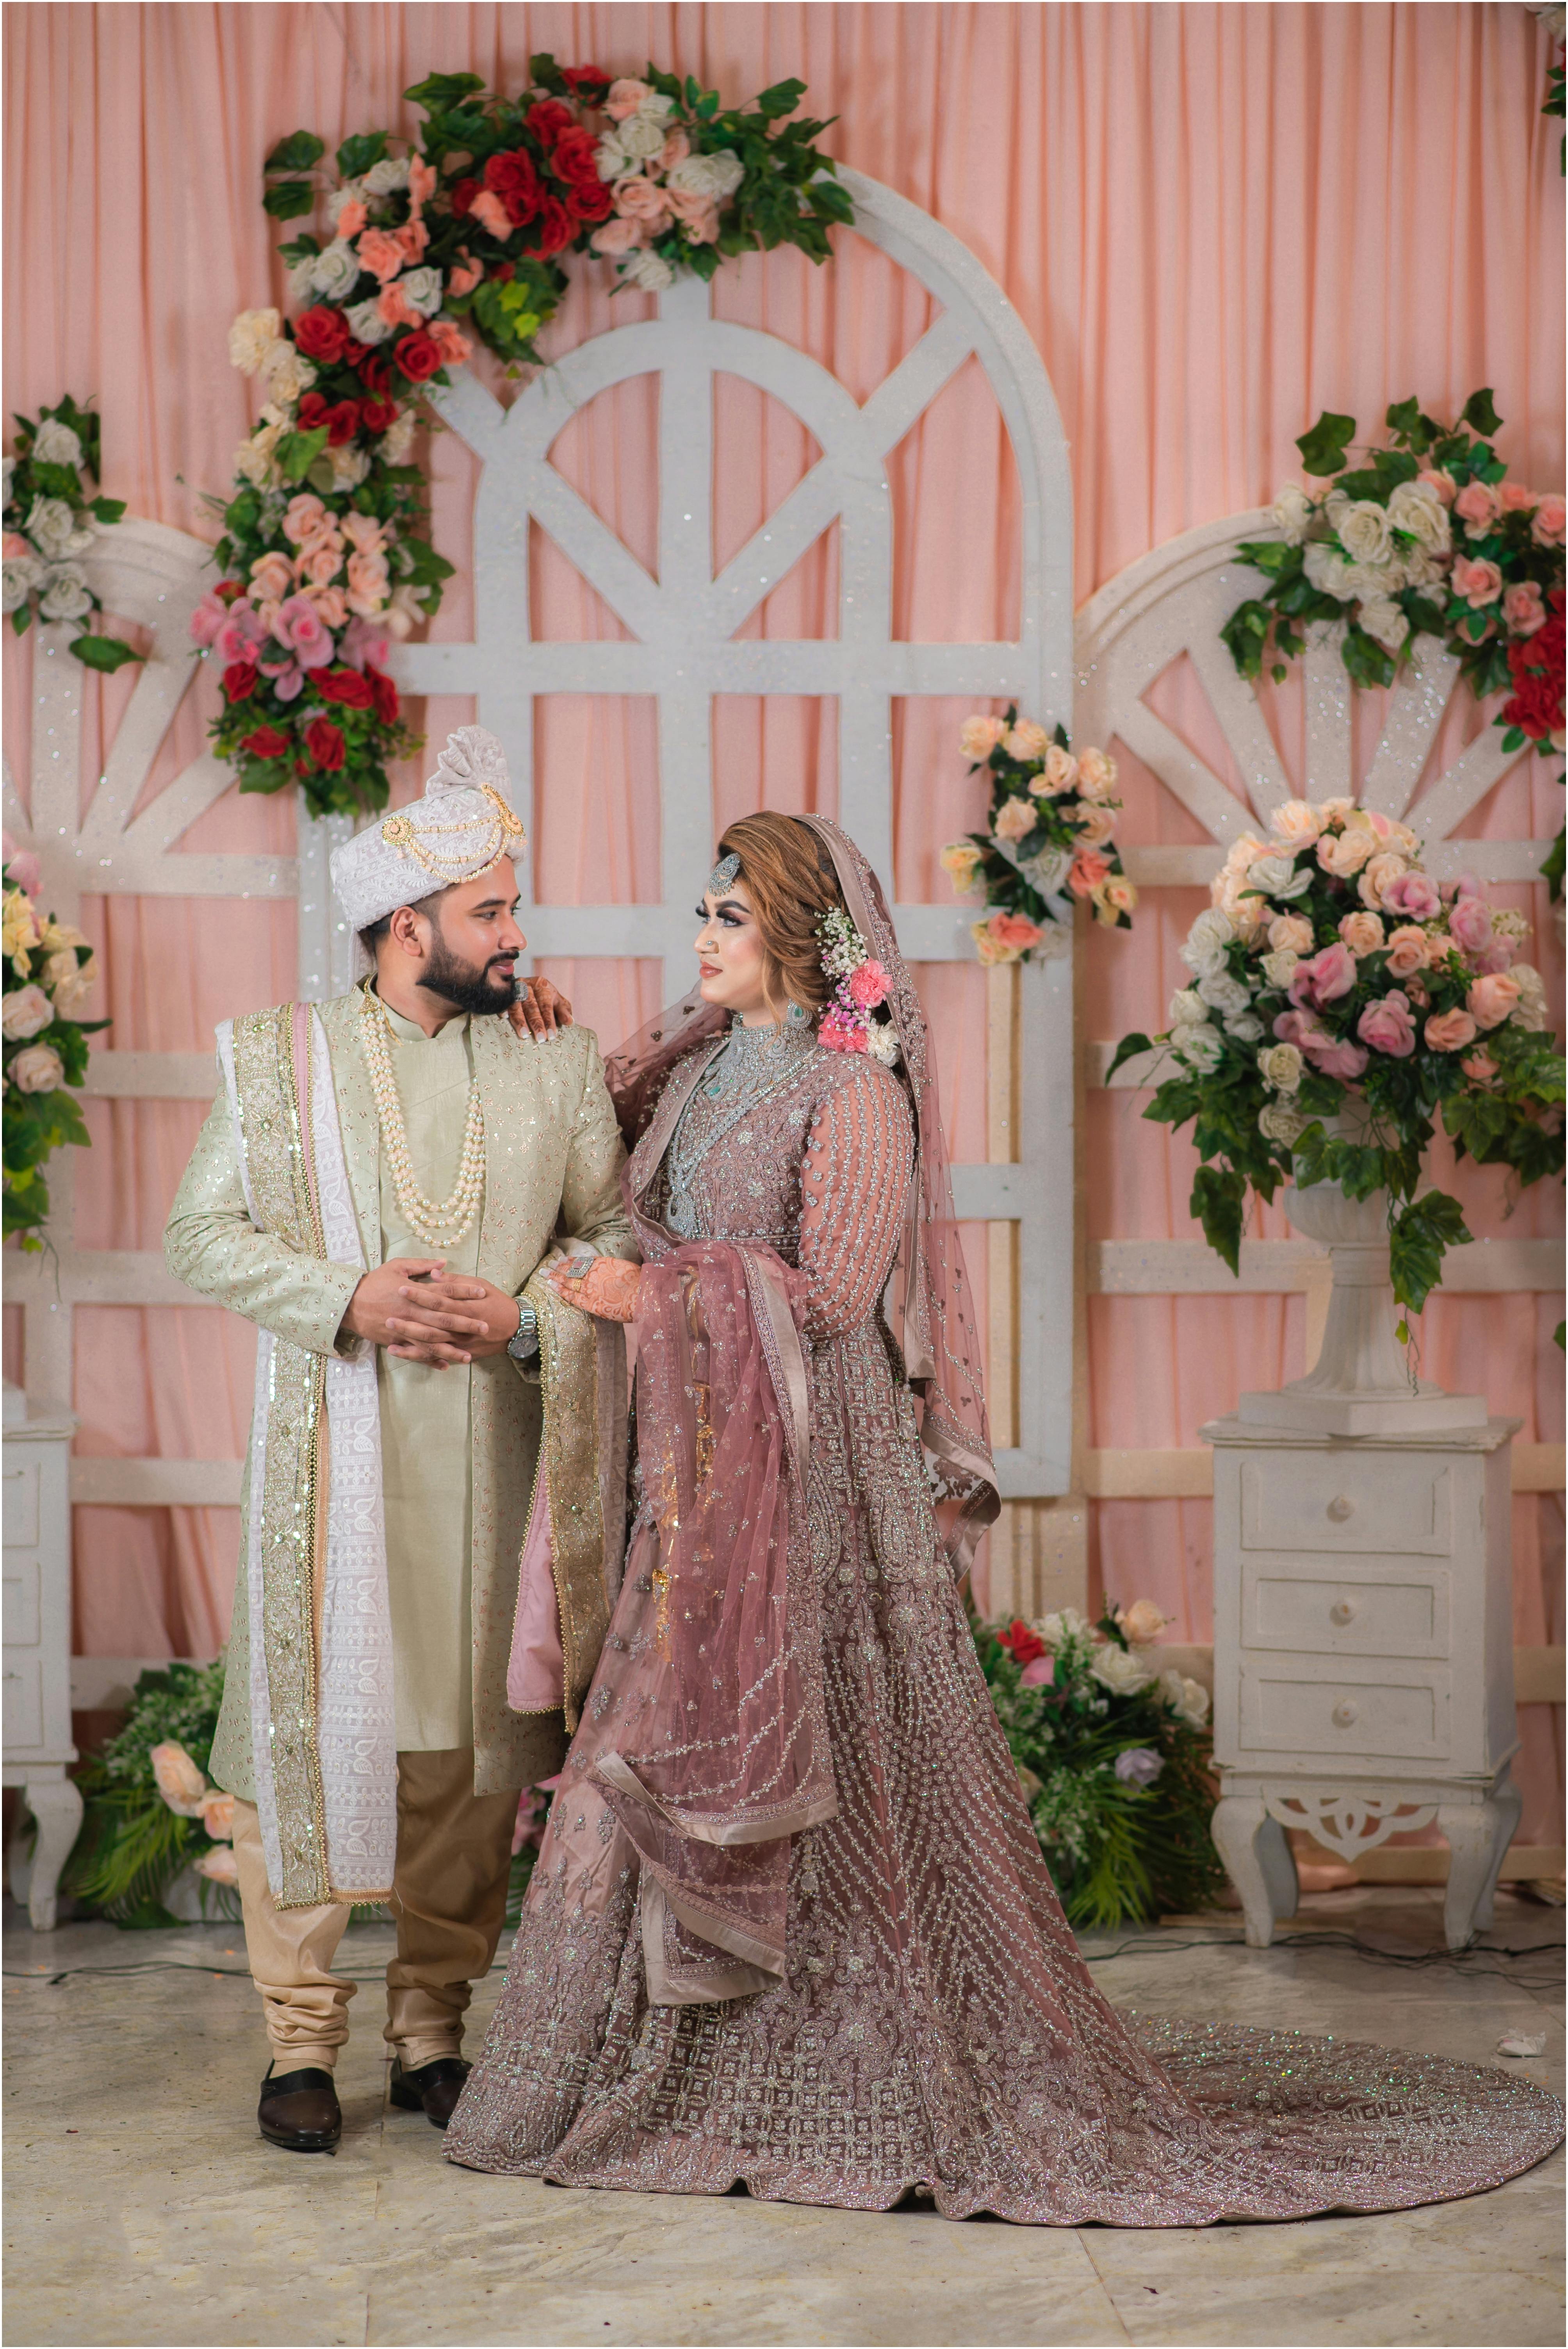 Blooming Red Rose in a Royal Style | Pakistani Bridal Dresses